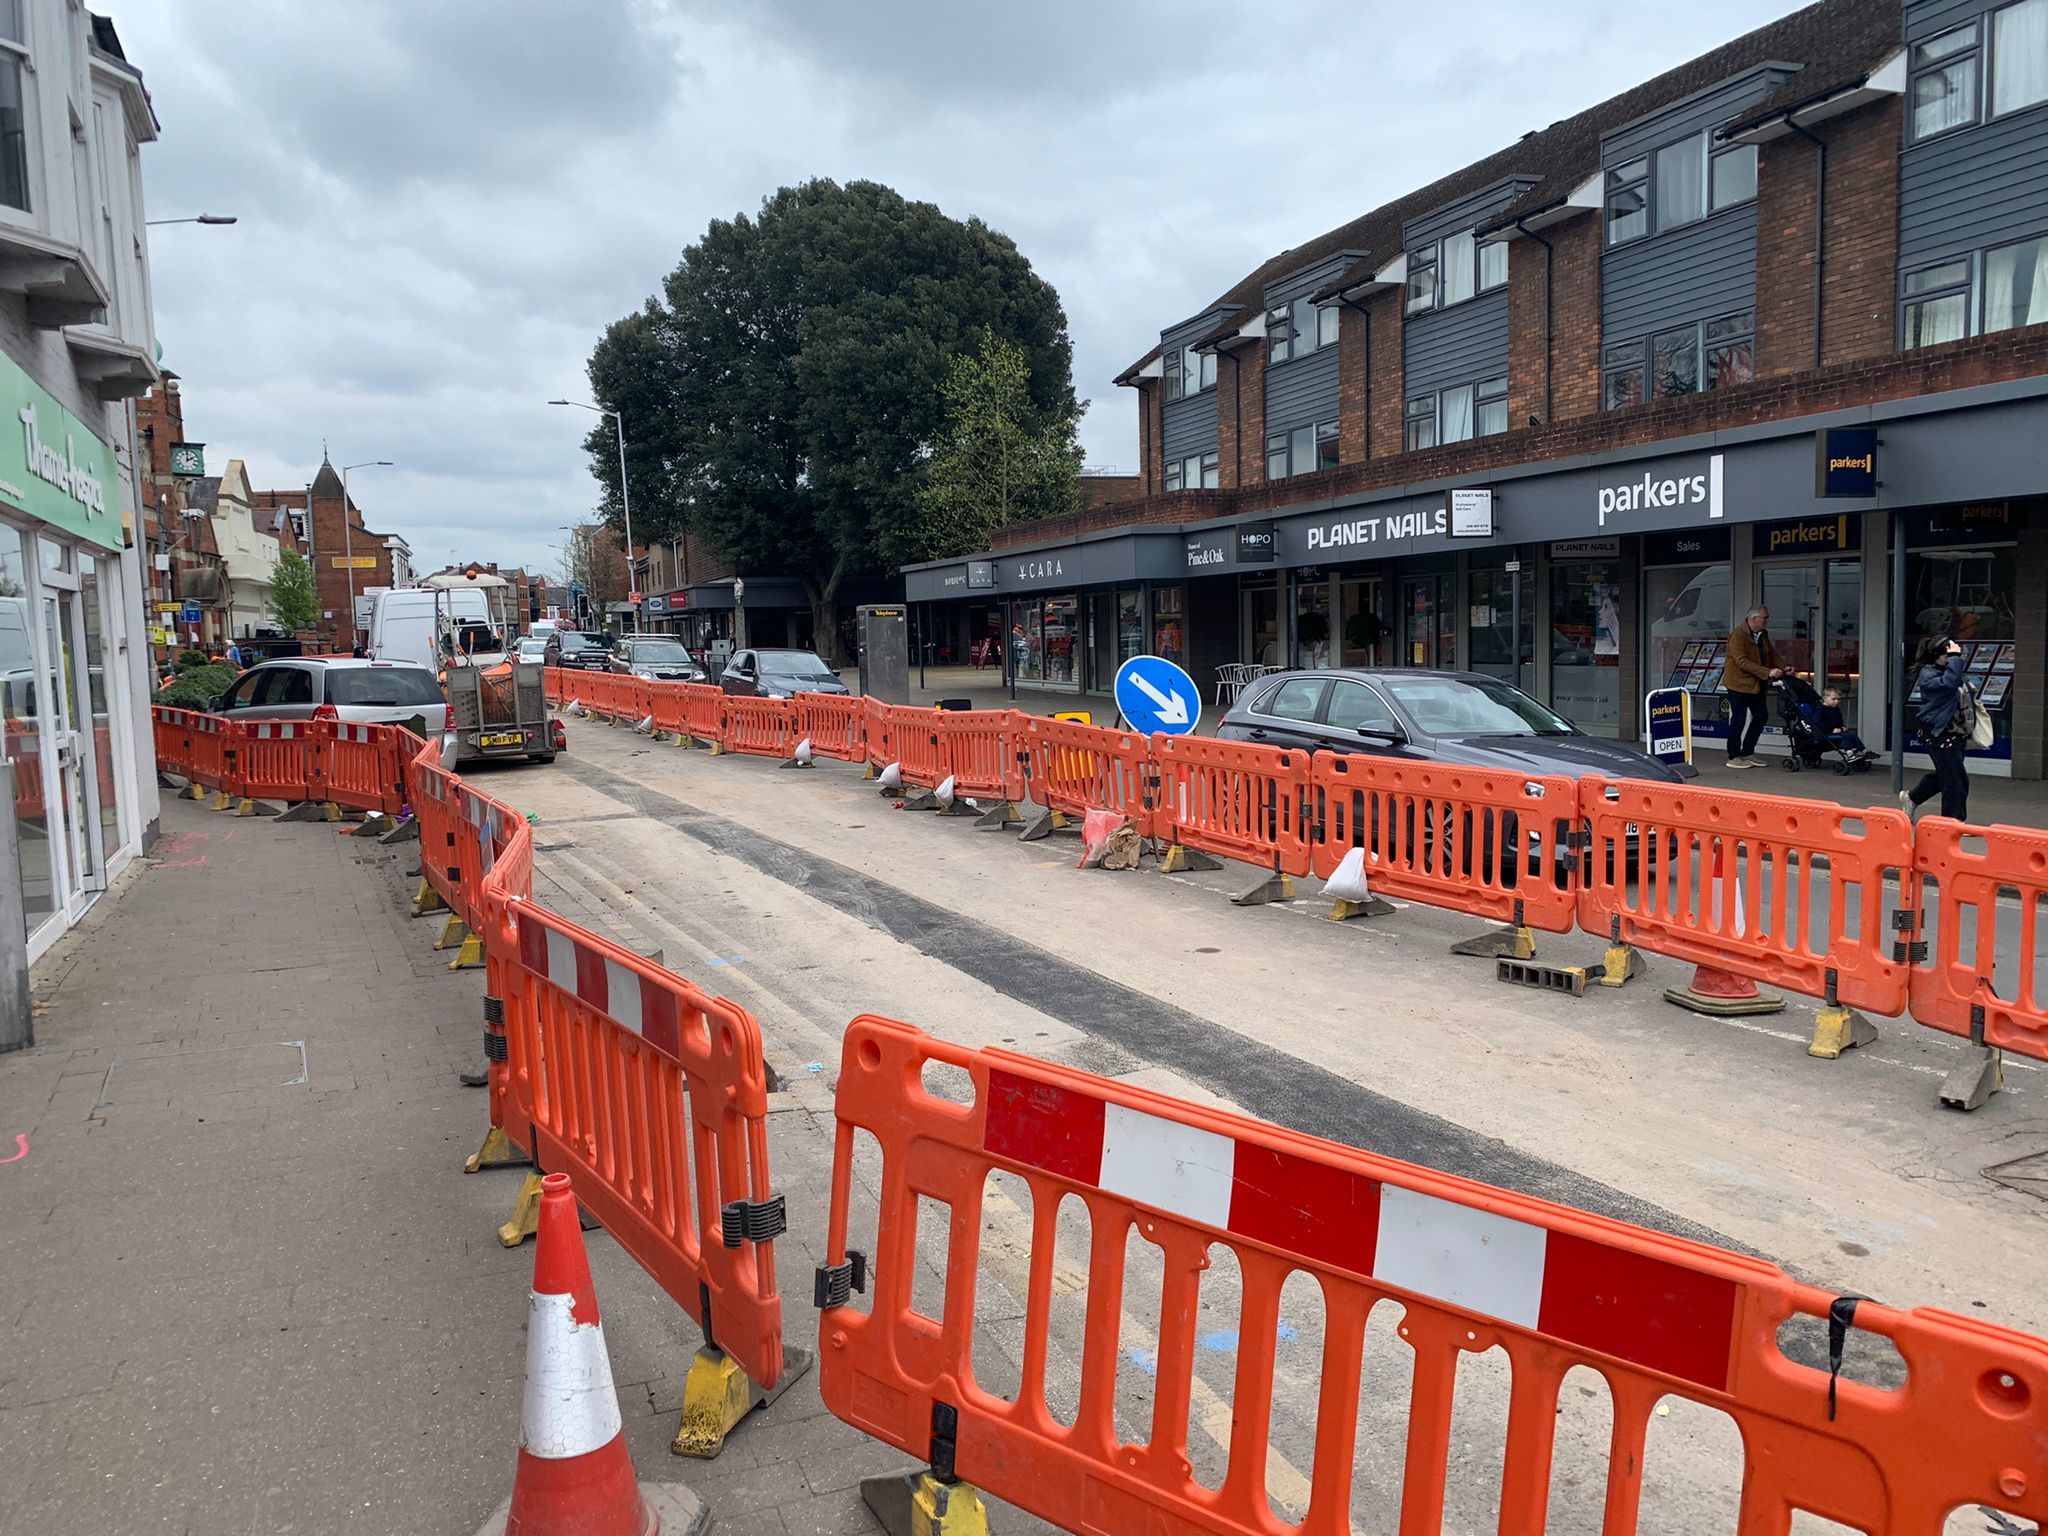 Roadworks have blighted Caversham over the past few weeks